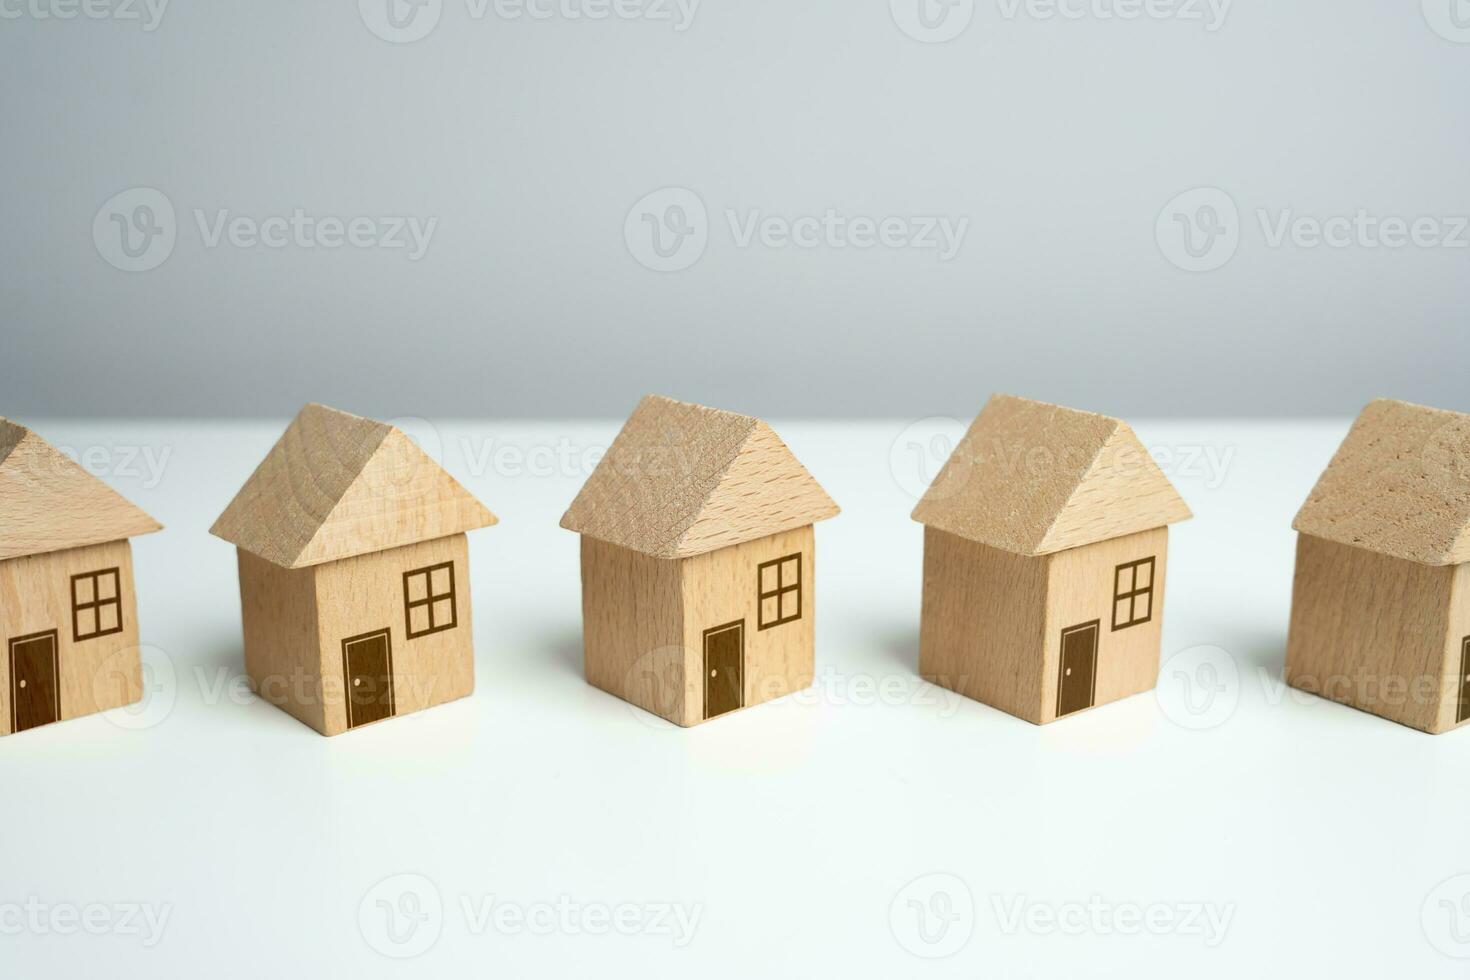 Wooden toy houses stand in a row. Find most suitable housing options. Offers on real estate market. Mortgage. Valuation of residential buildings. Realtor services. Buying and selling. photo